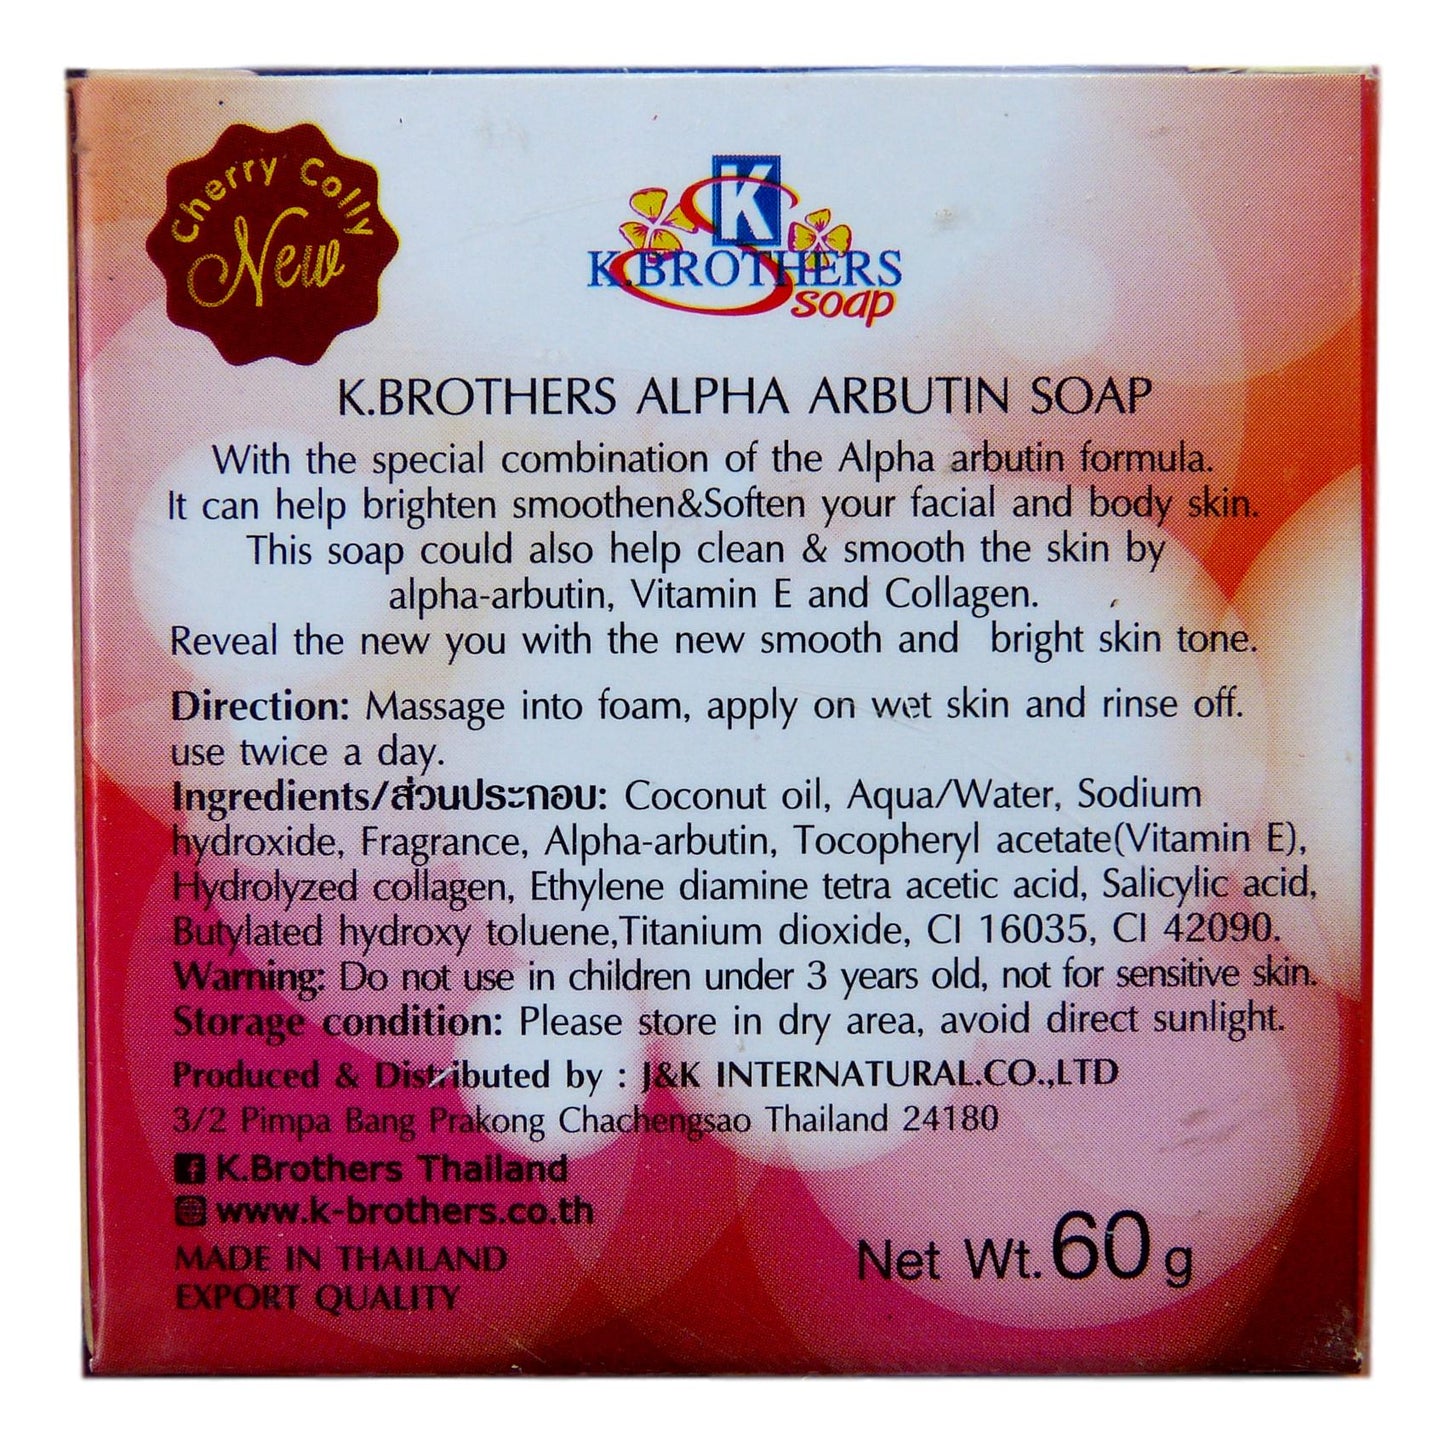 K. Brothers Alpha Arbutin Soap Pack of 12 - Asian Beauty Supply